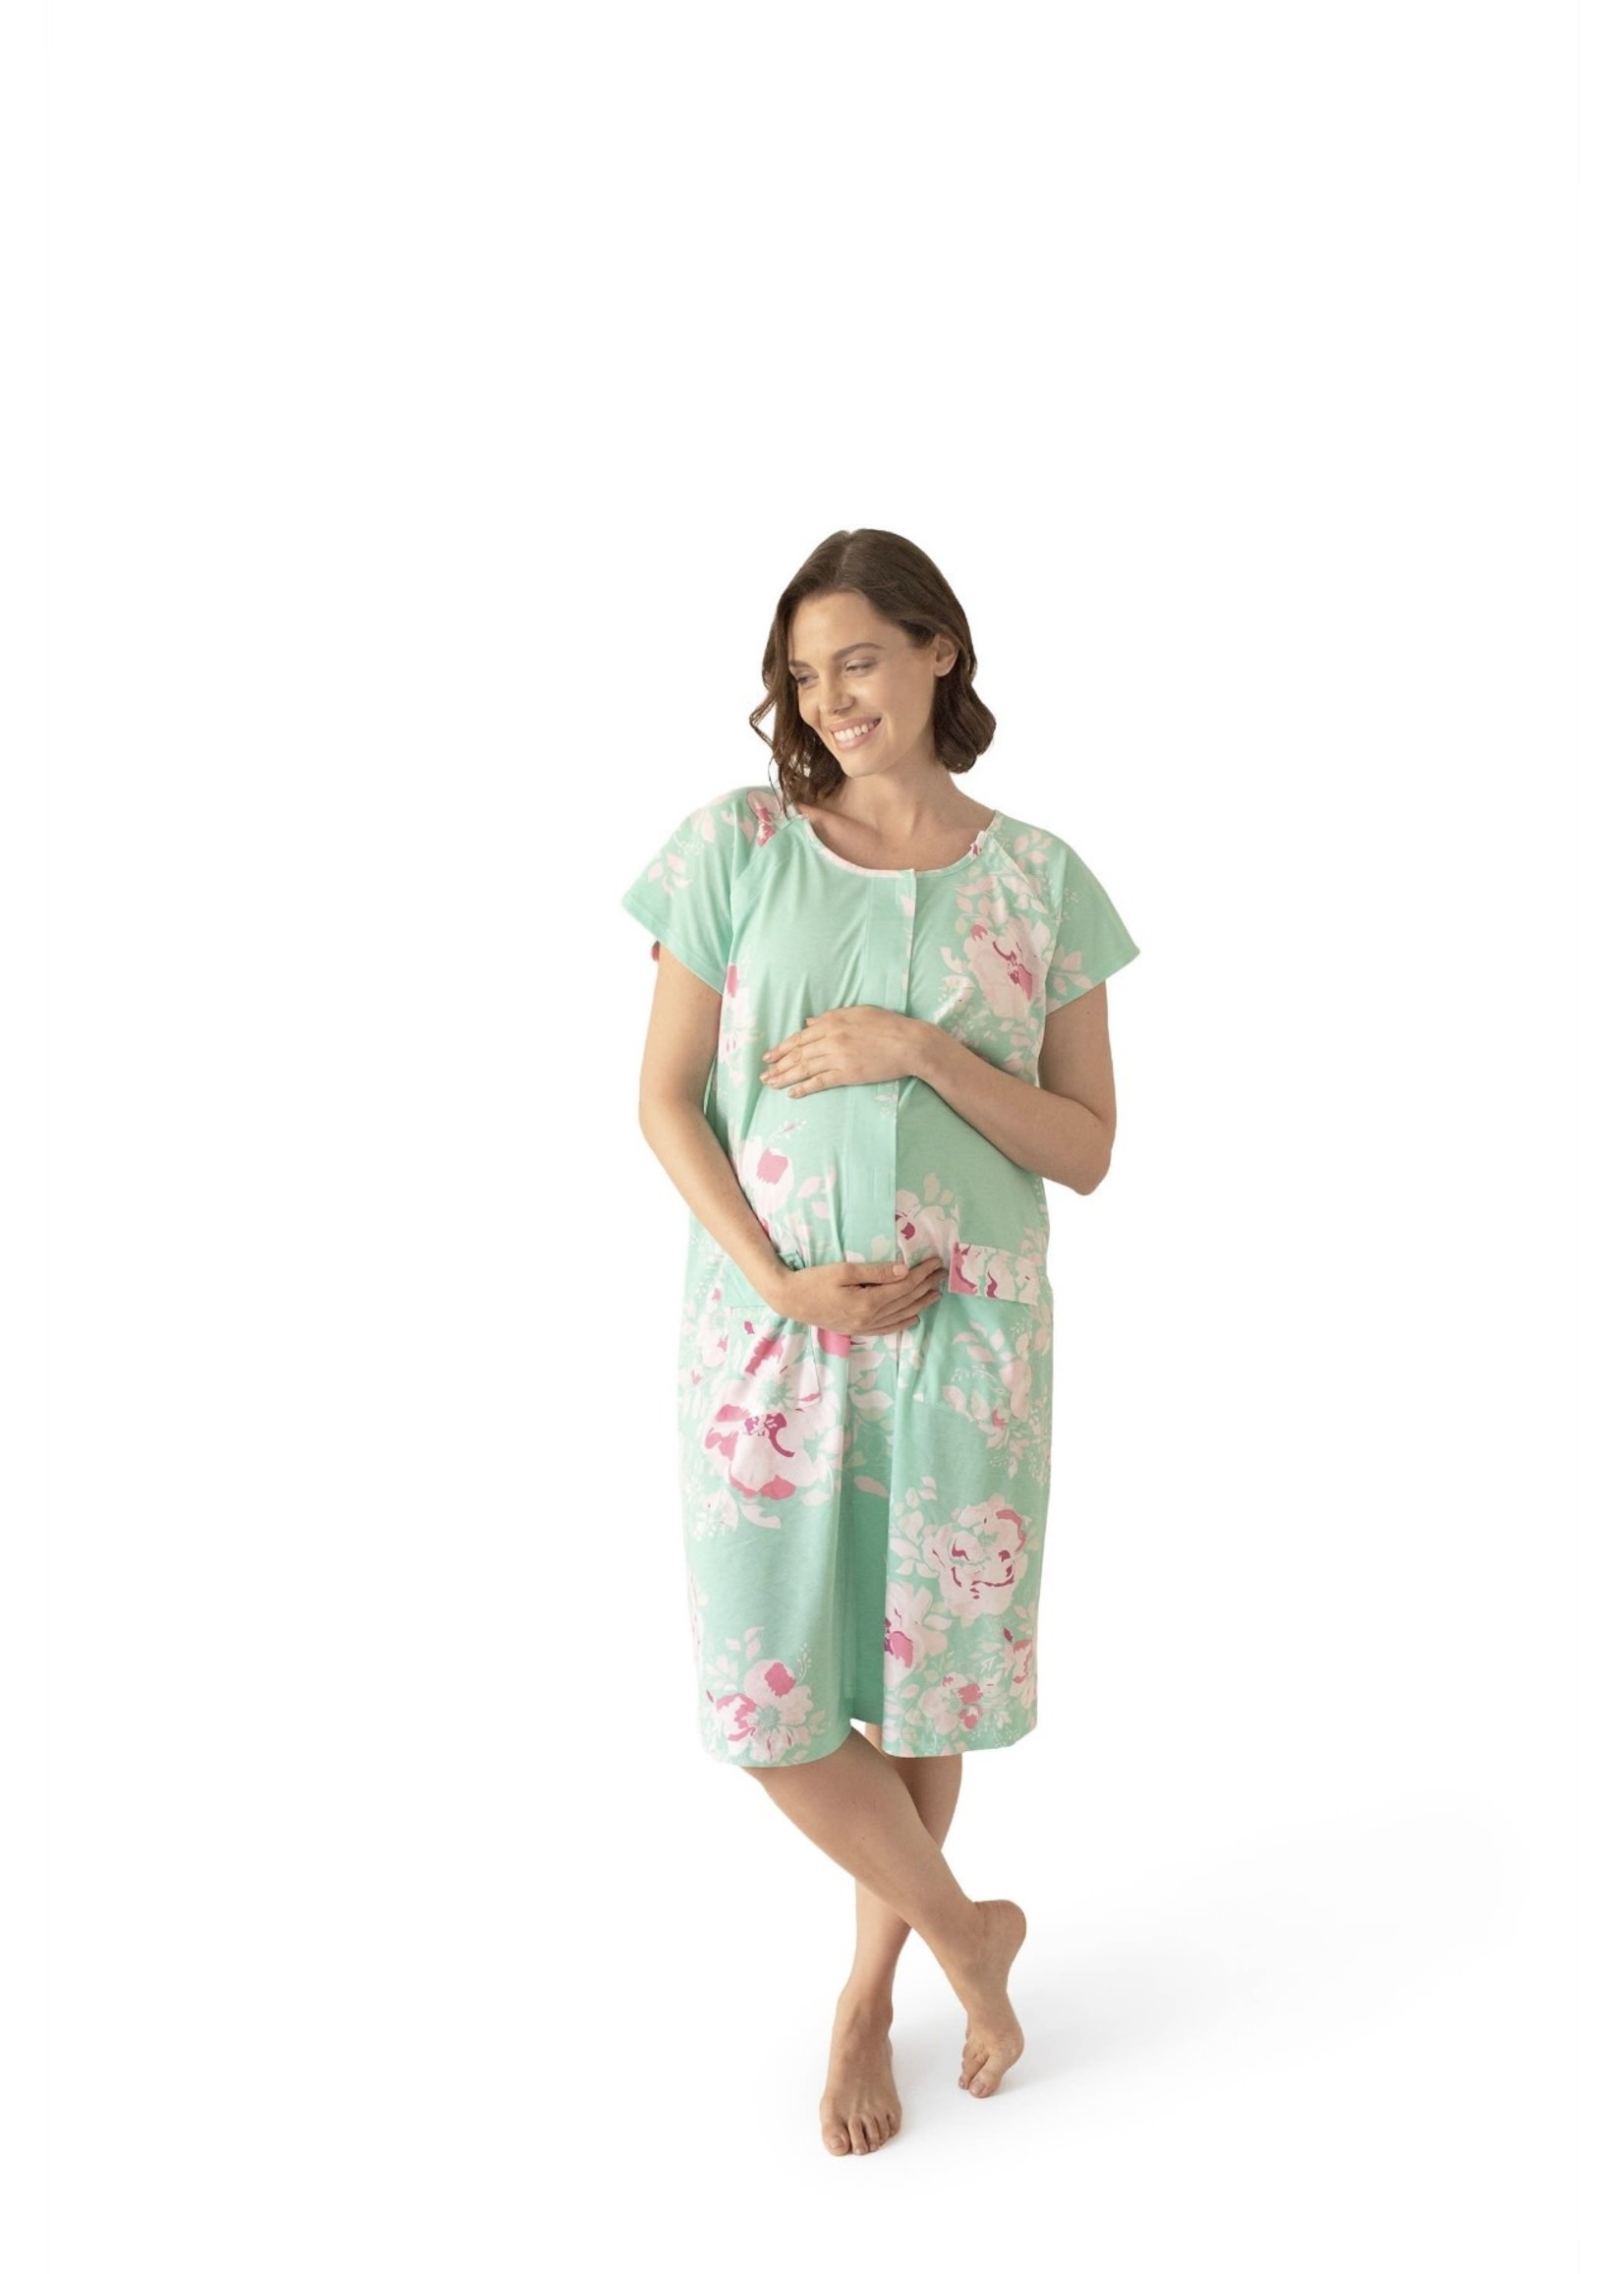 Kindred Bravely Universal Labor & Delivery Gown